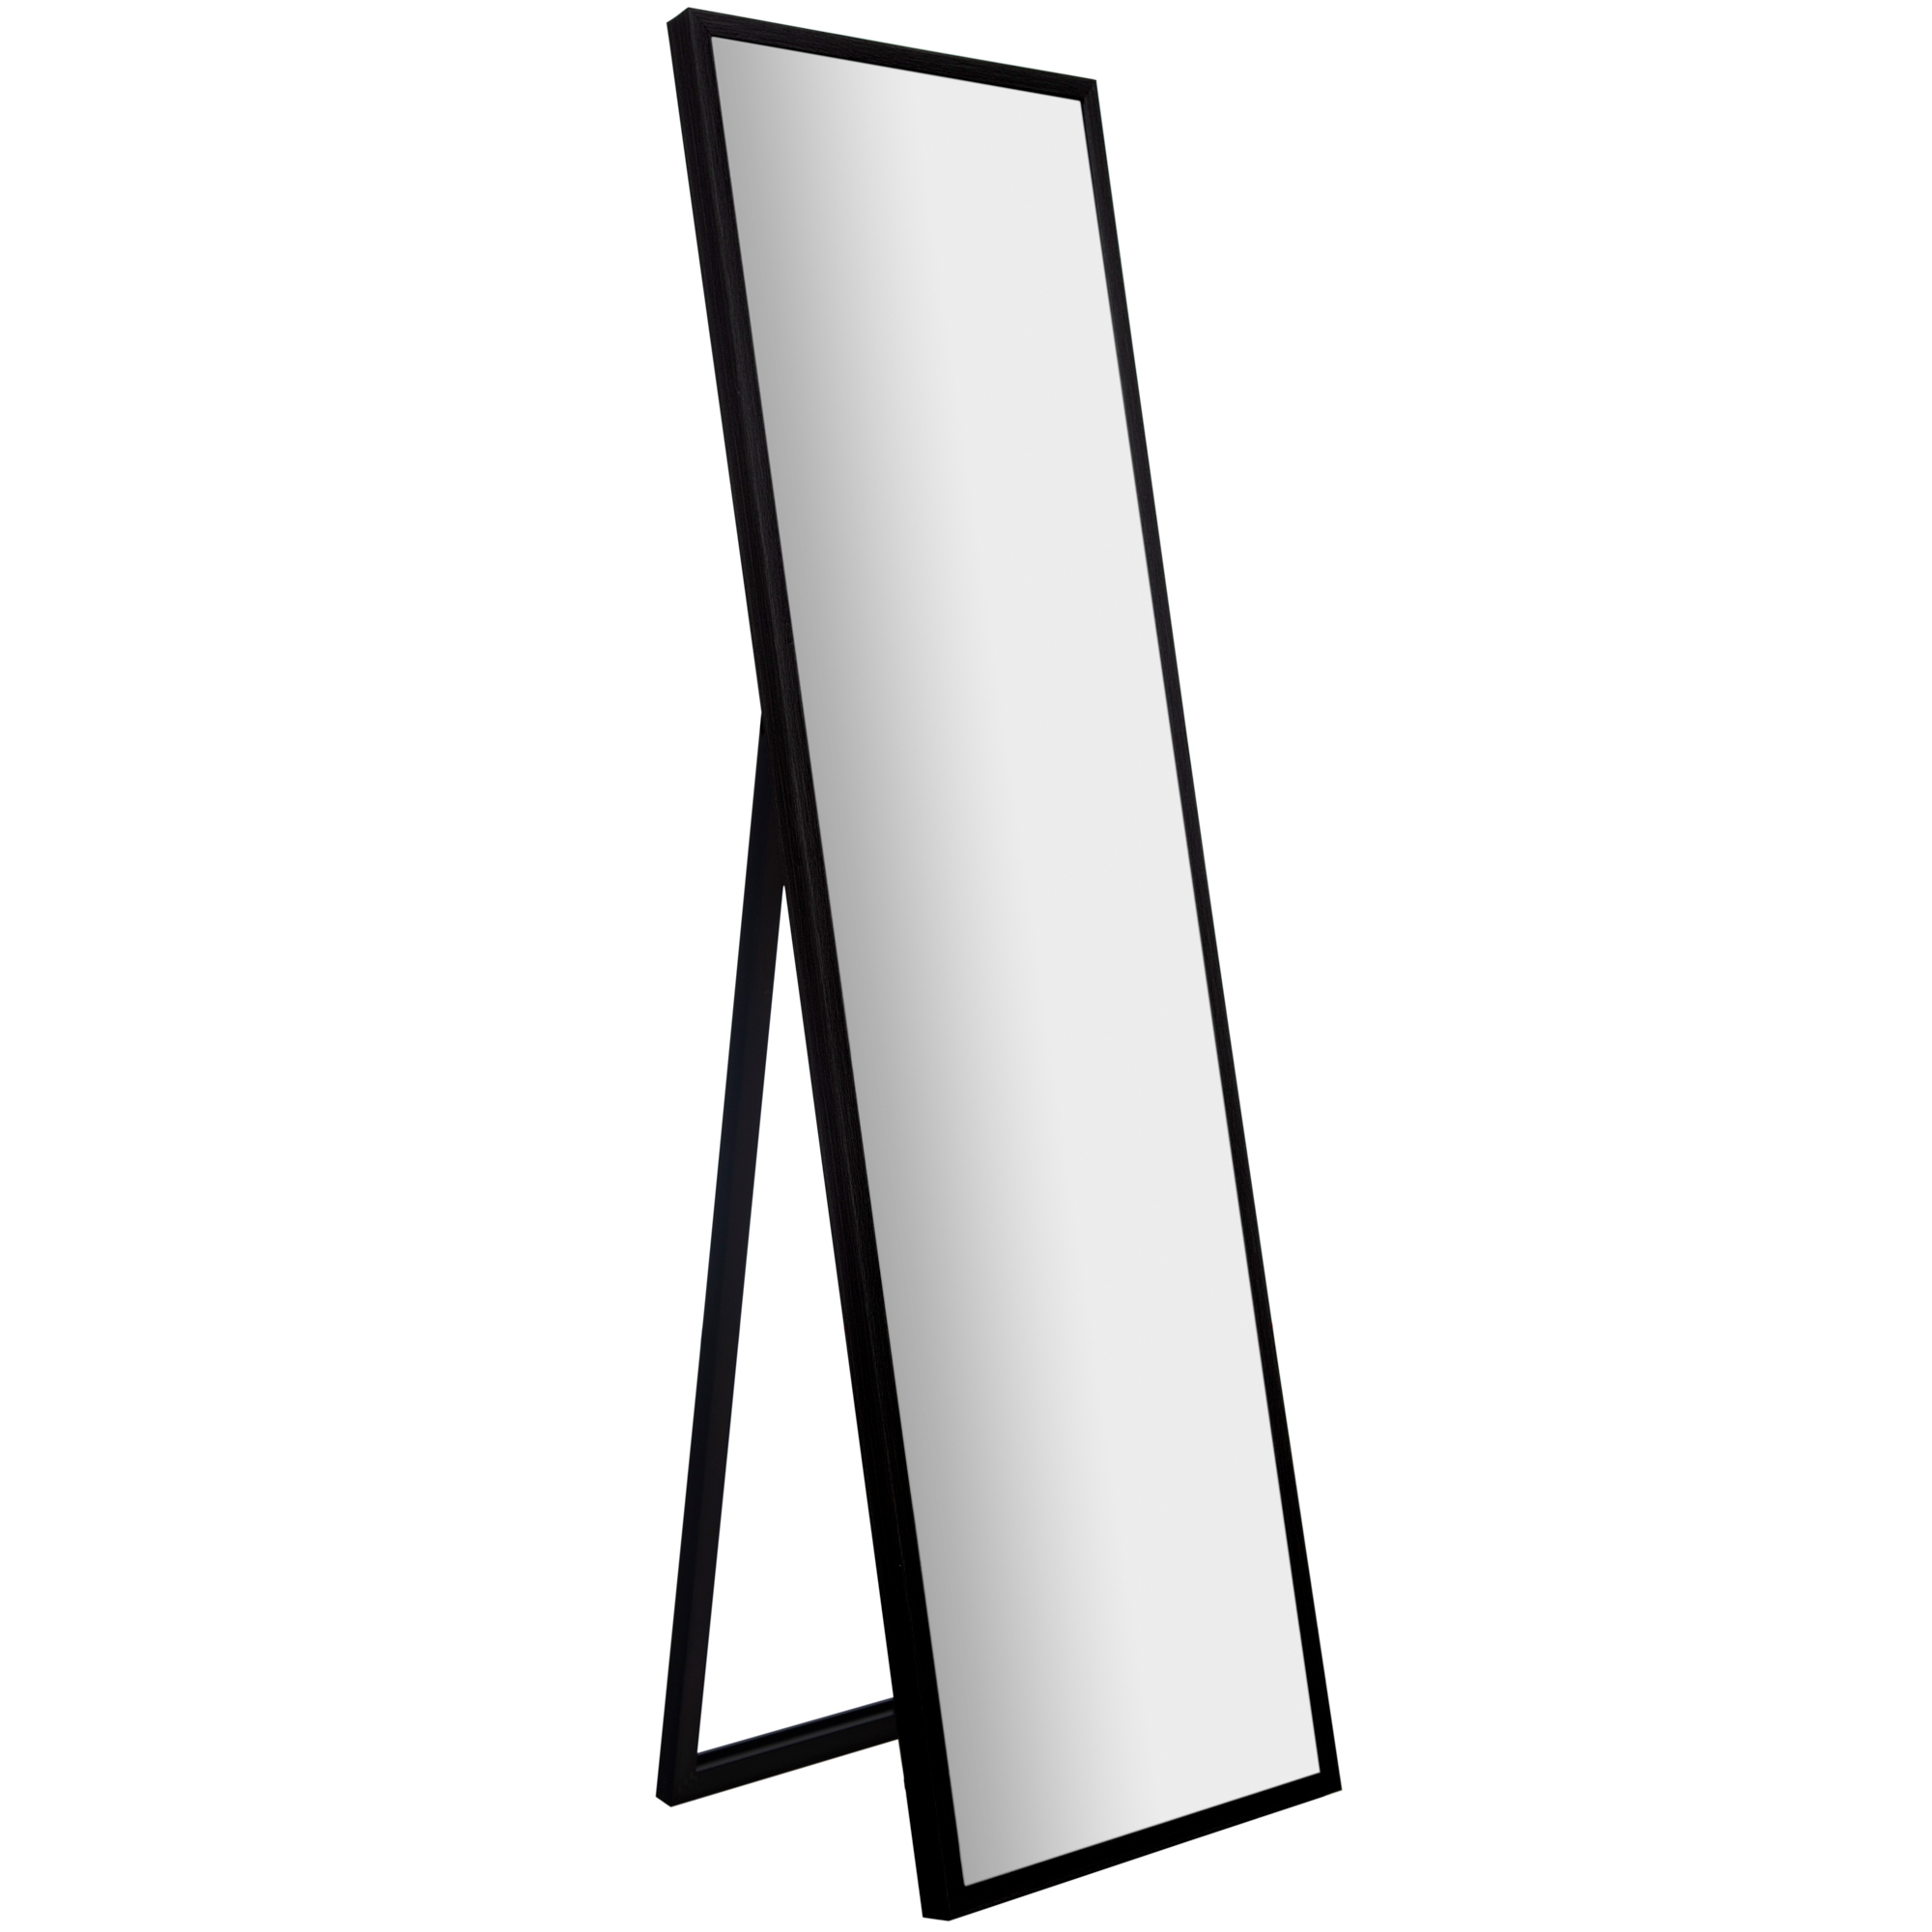 Framed Black Floor Free Standing Mirror with Easel 16"x57" by Gallery Solutions - image 1 of 5